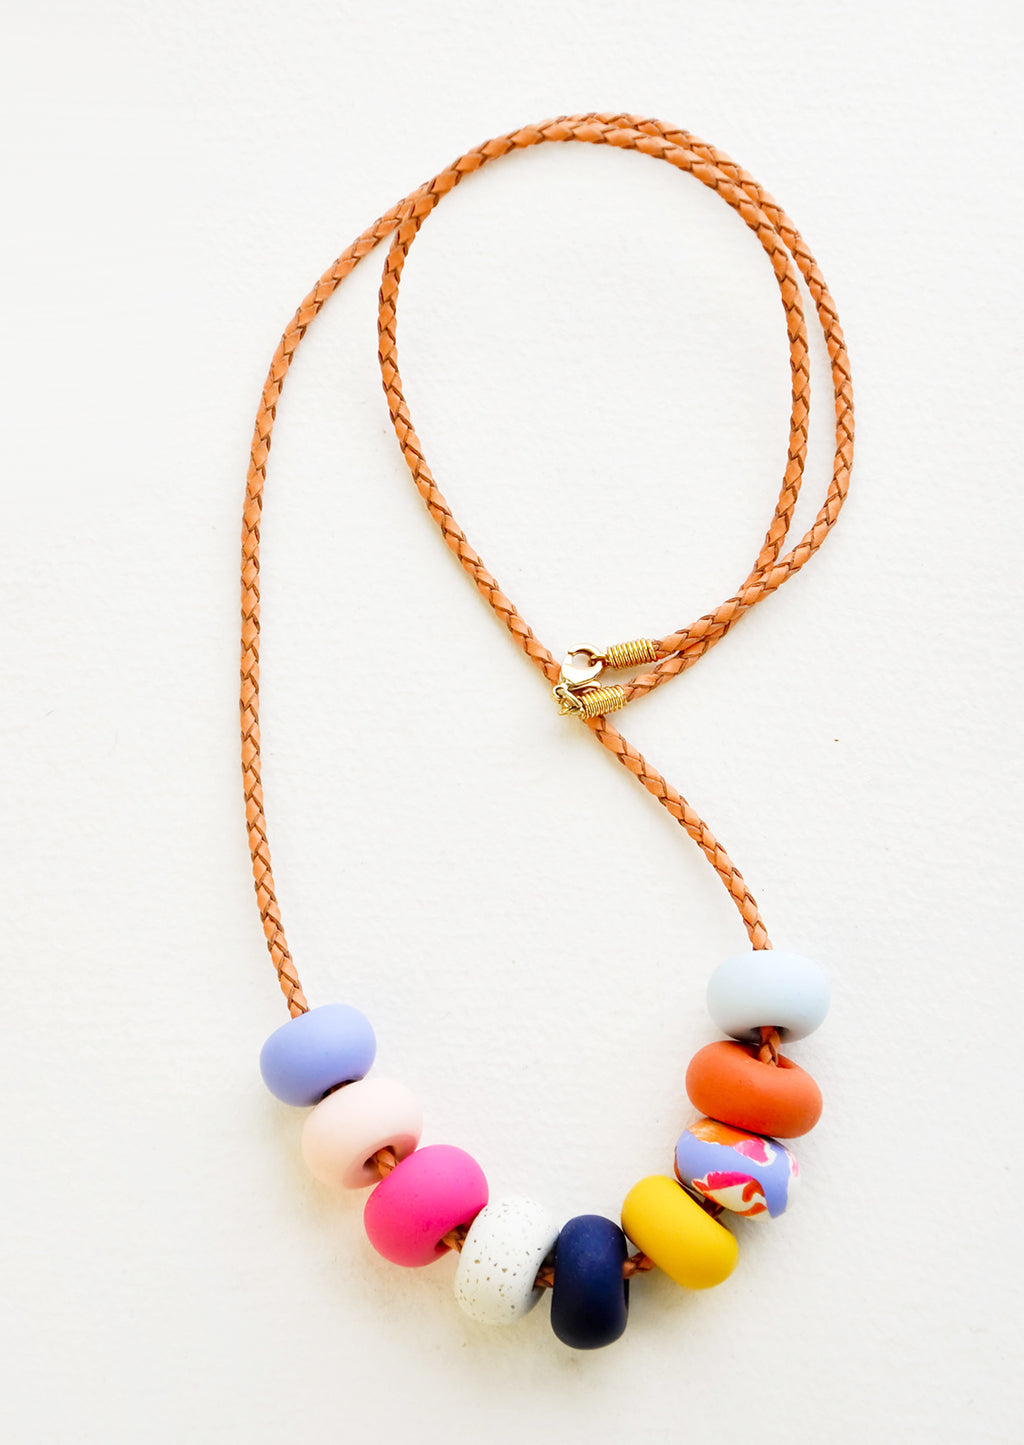 9 Bead: Necklace with gold clasp, brown woven leather cord, and nine multi-colored clay beads in blues, pinks, yellows, and oranges. 